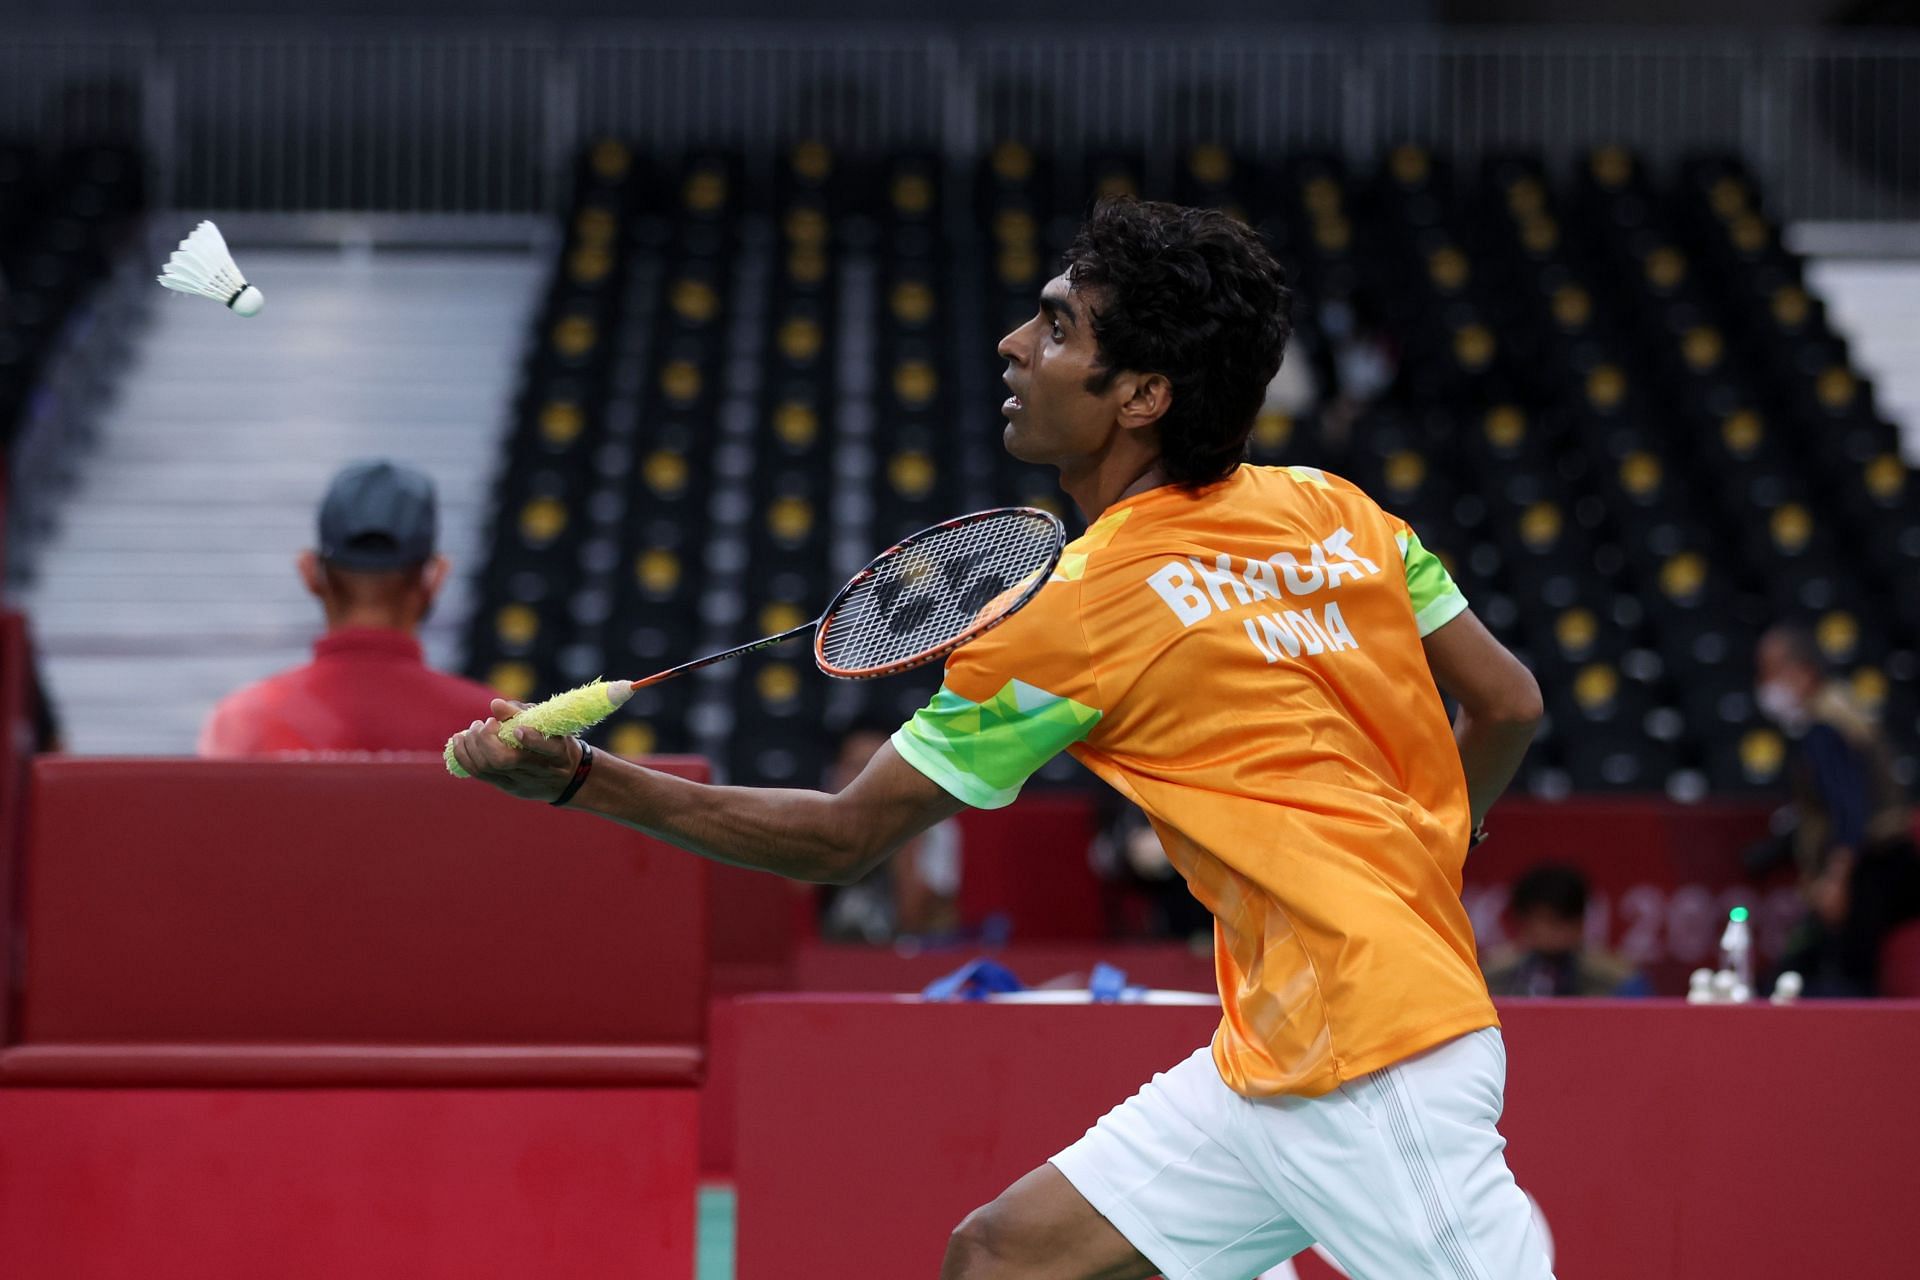 Indian shuttler Pramod Bhagat in action at the 2021 Tokyo Paralympics.